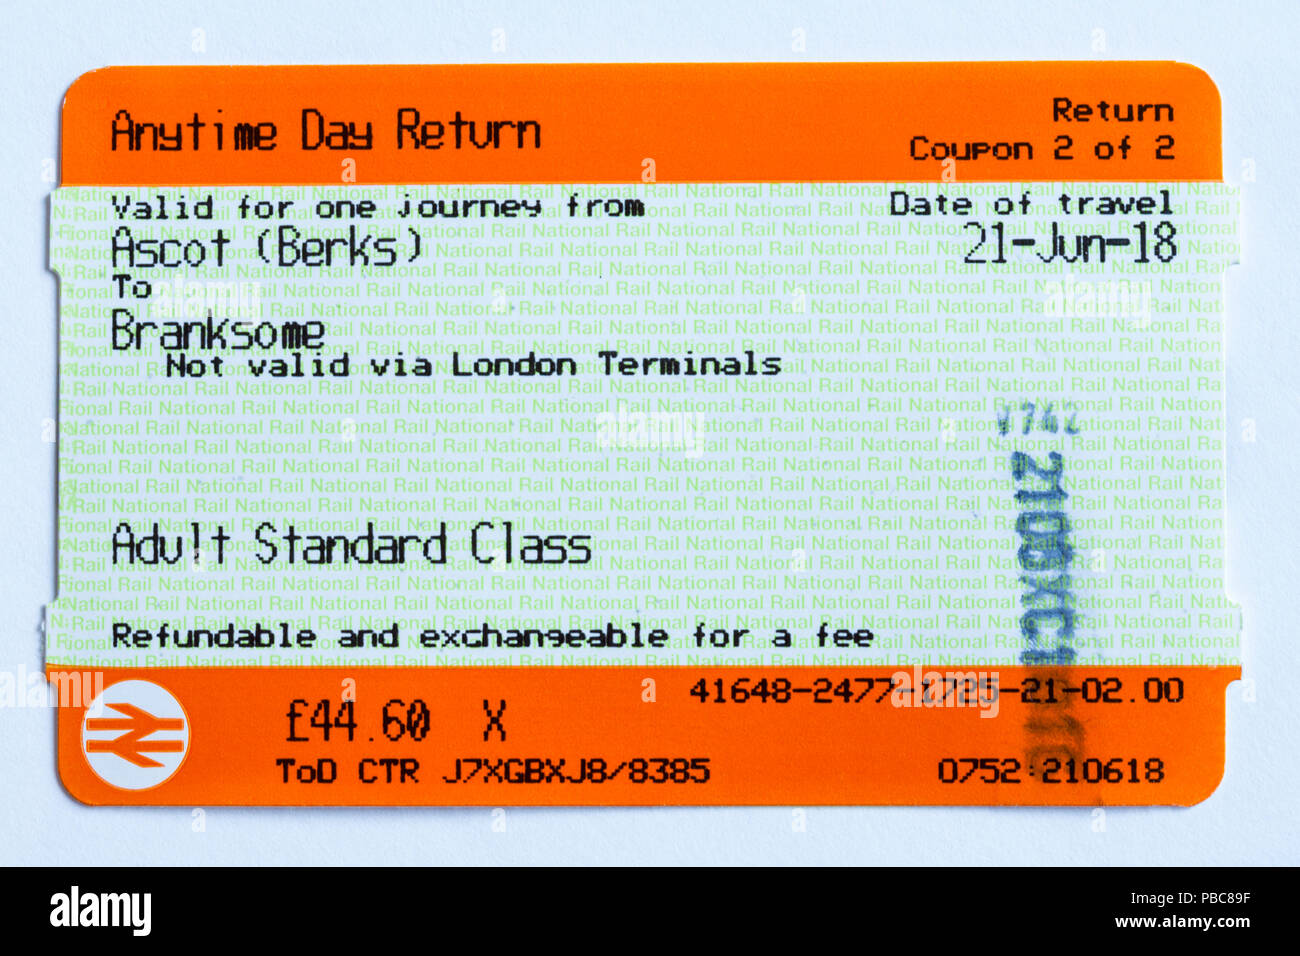 Anytime Day Return train ticket for travel between Ascot (Berks) and Branksome isolated on white background Stock Photo